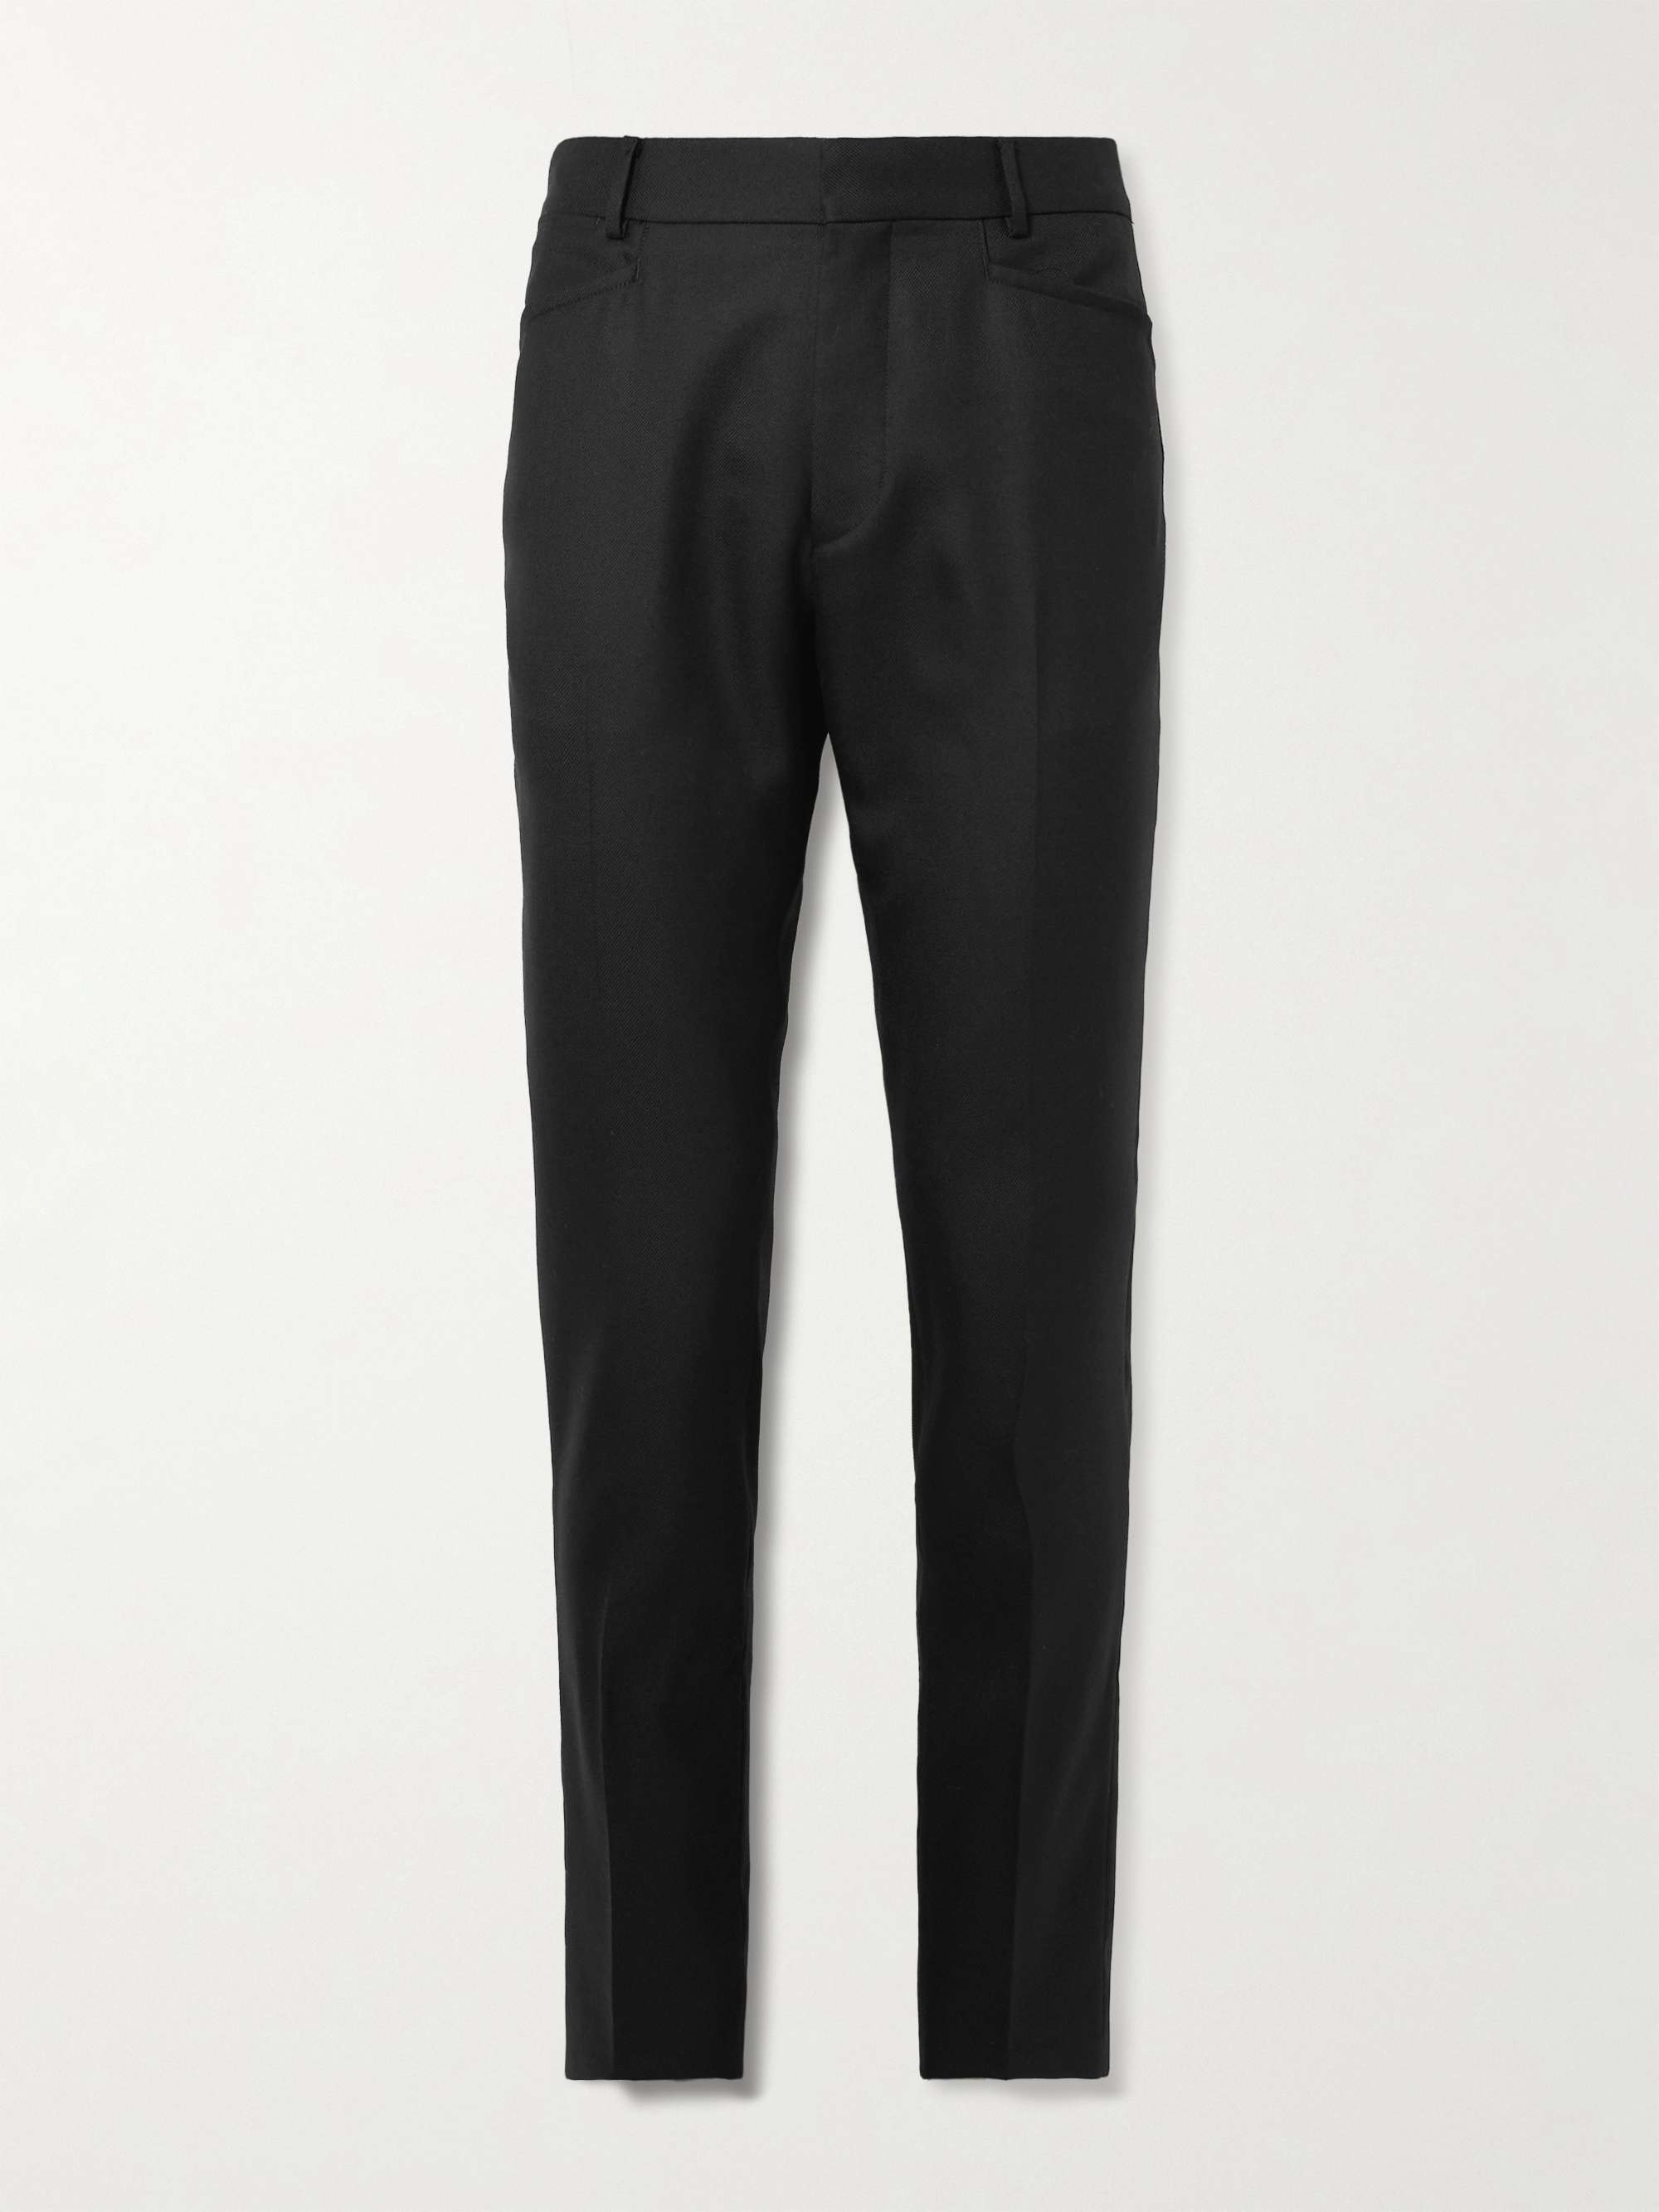 TOM FORD Slim-Fit Wool, Mohair and Silk-Blend Twill Trousers for Men ...